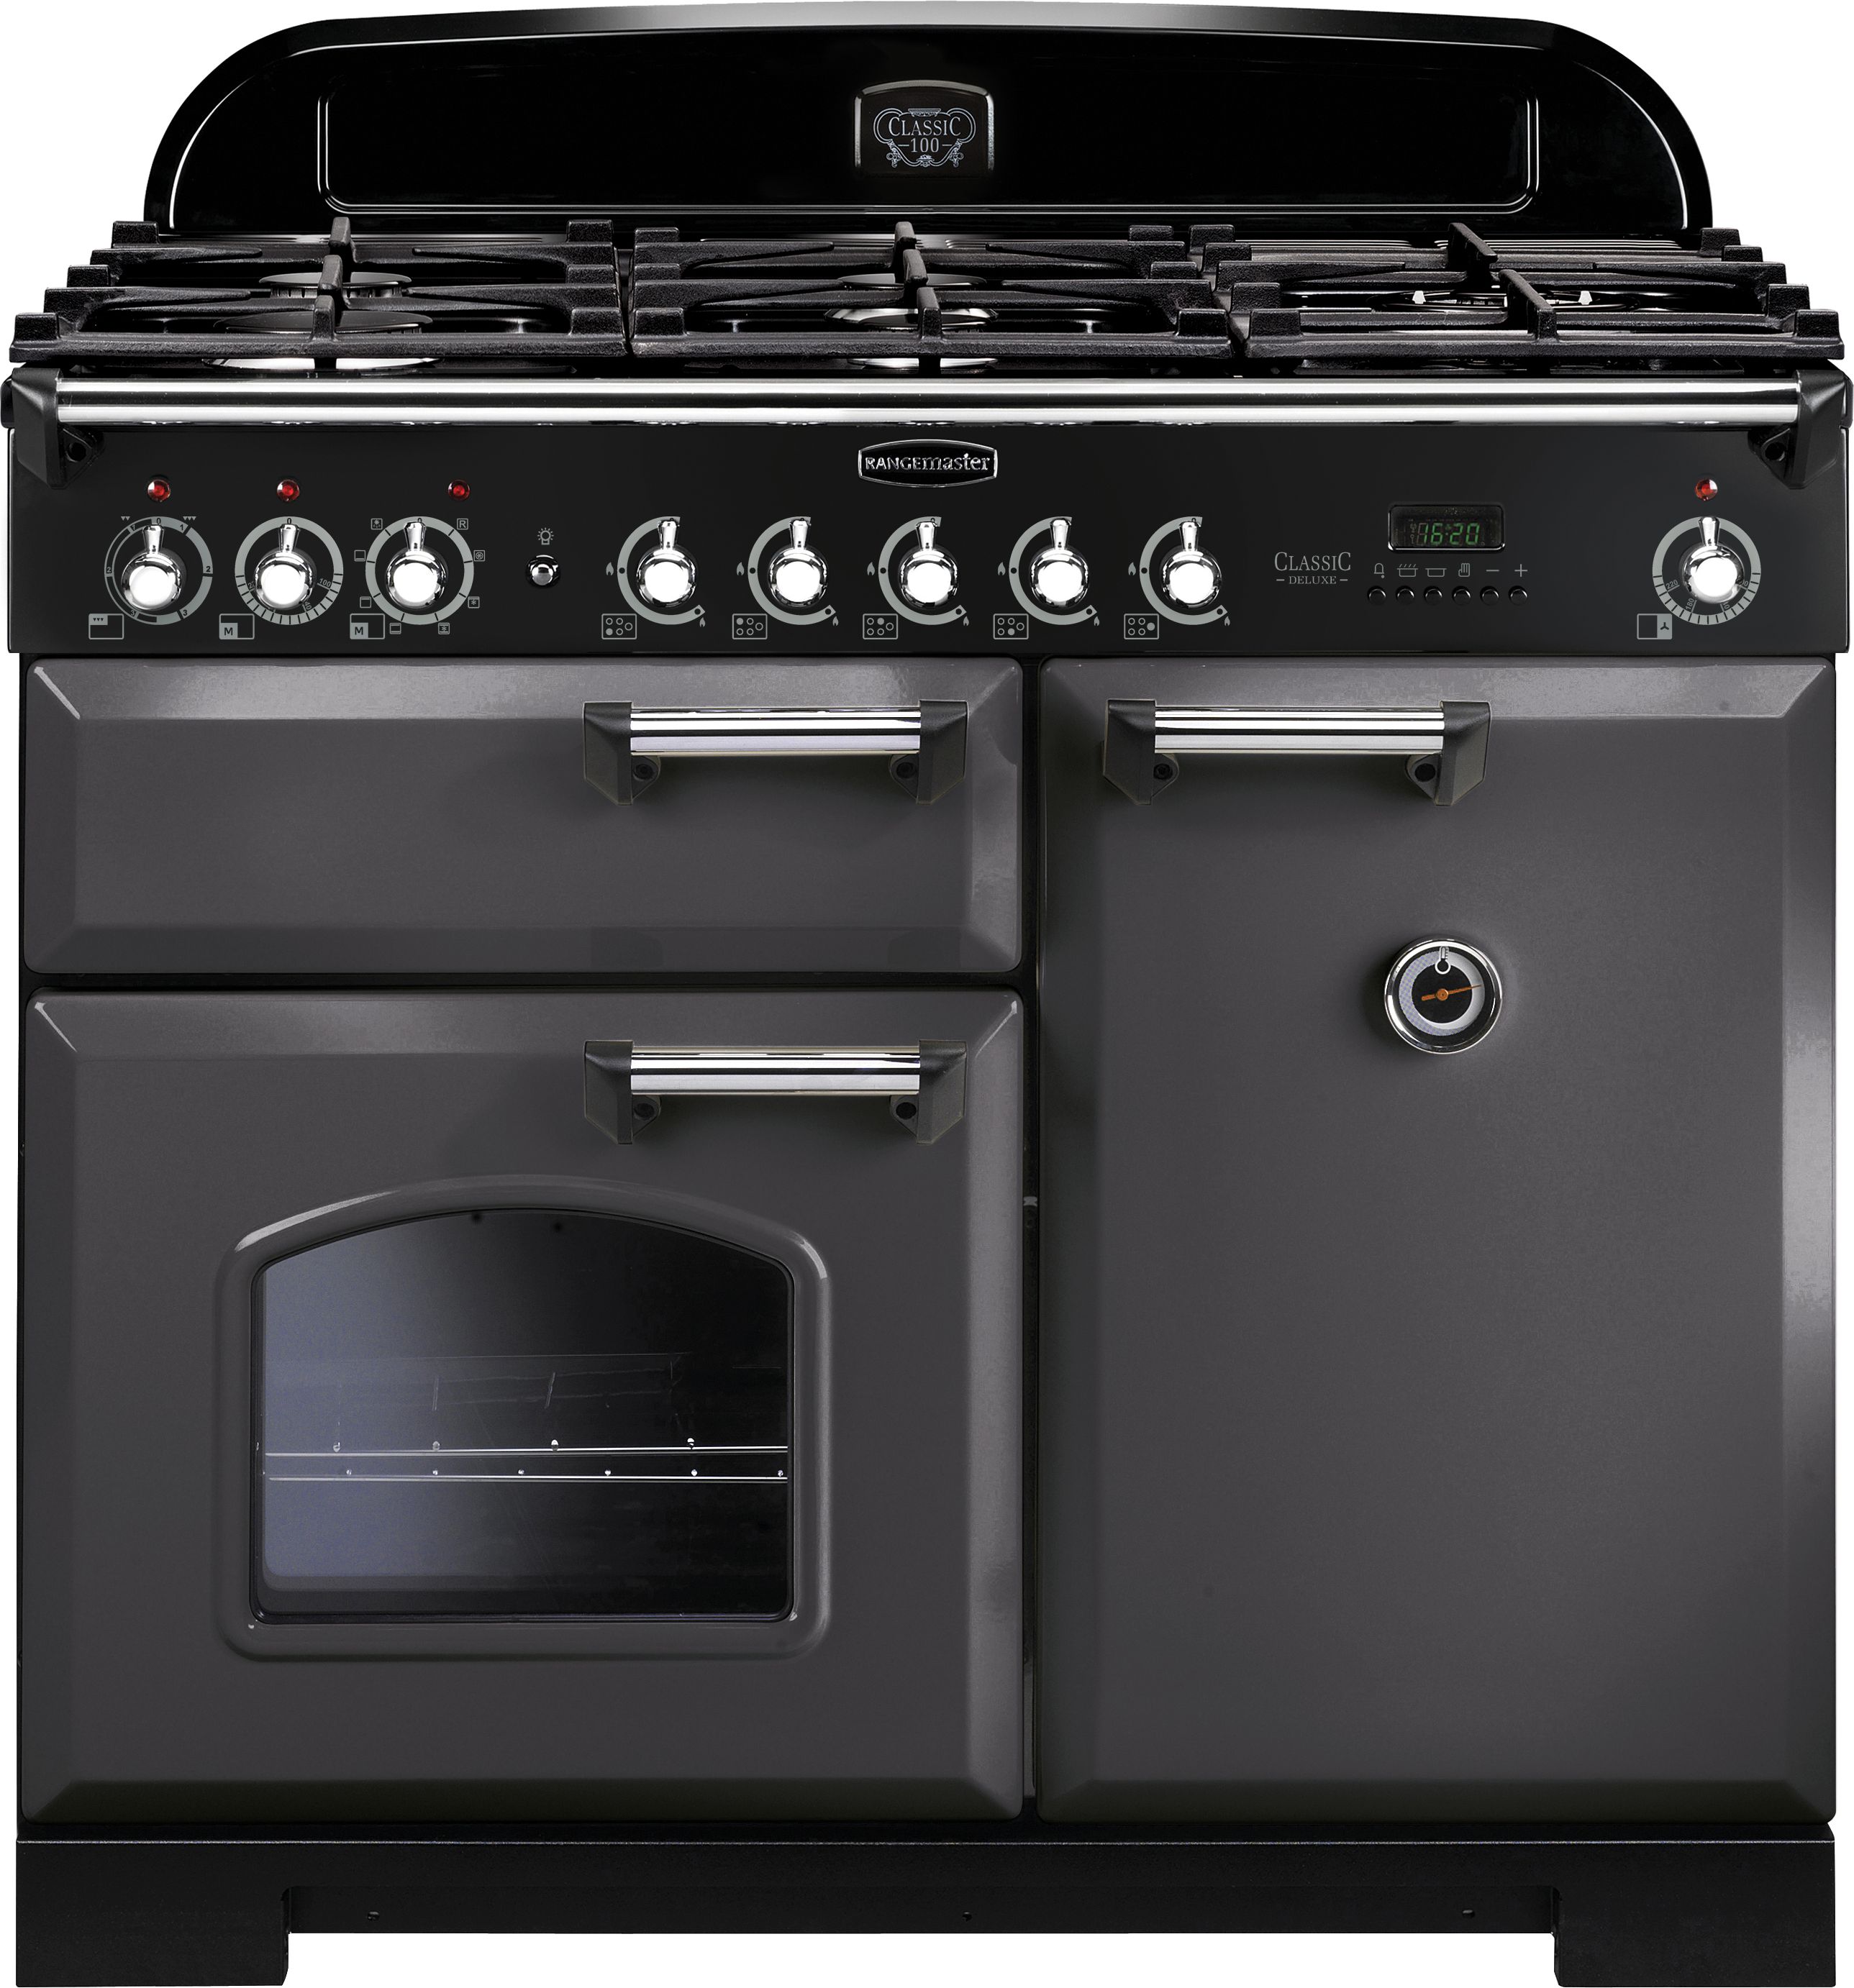 Rangemaster Classic Deluxe CDL100DFFSL/C 100cm Dual Fuel Range Cooker - Slate / Chrome - A/A Rated, Grey